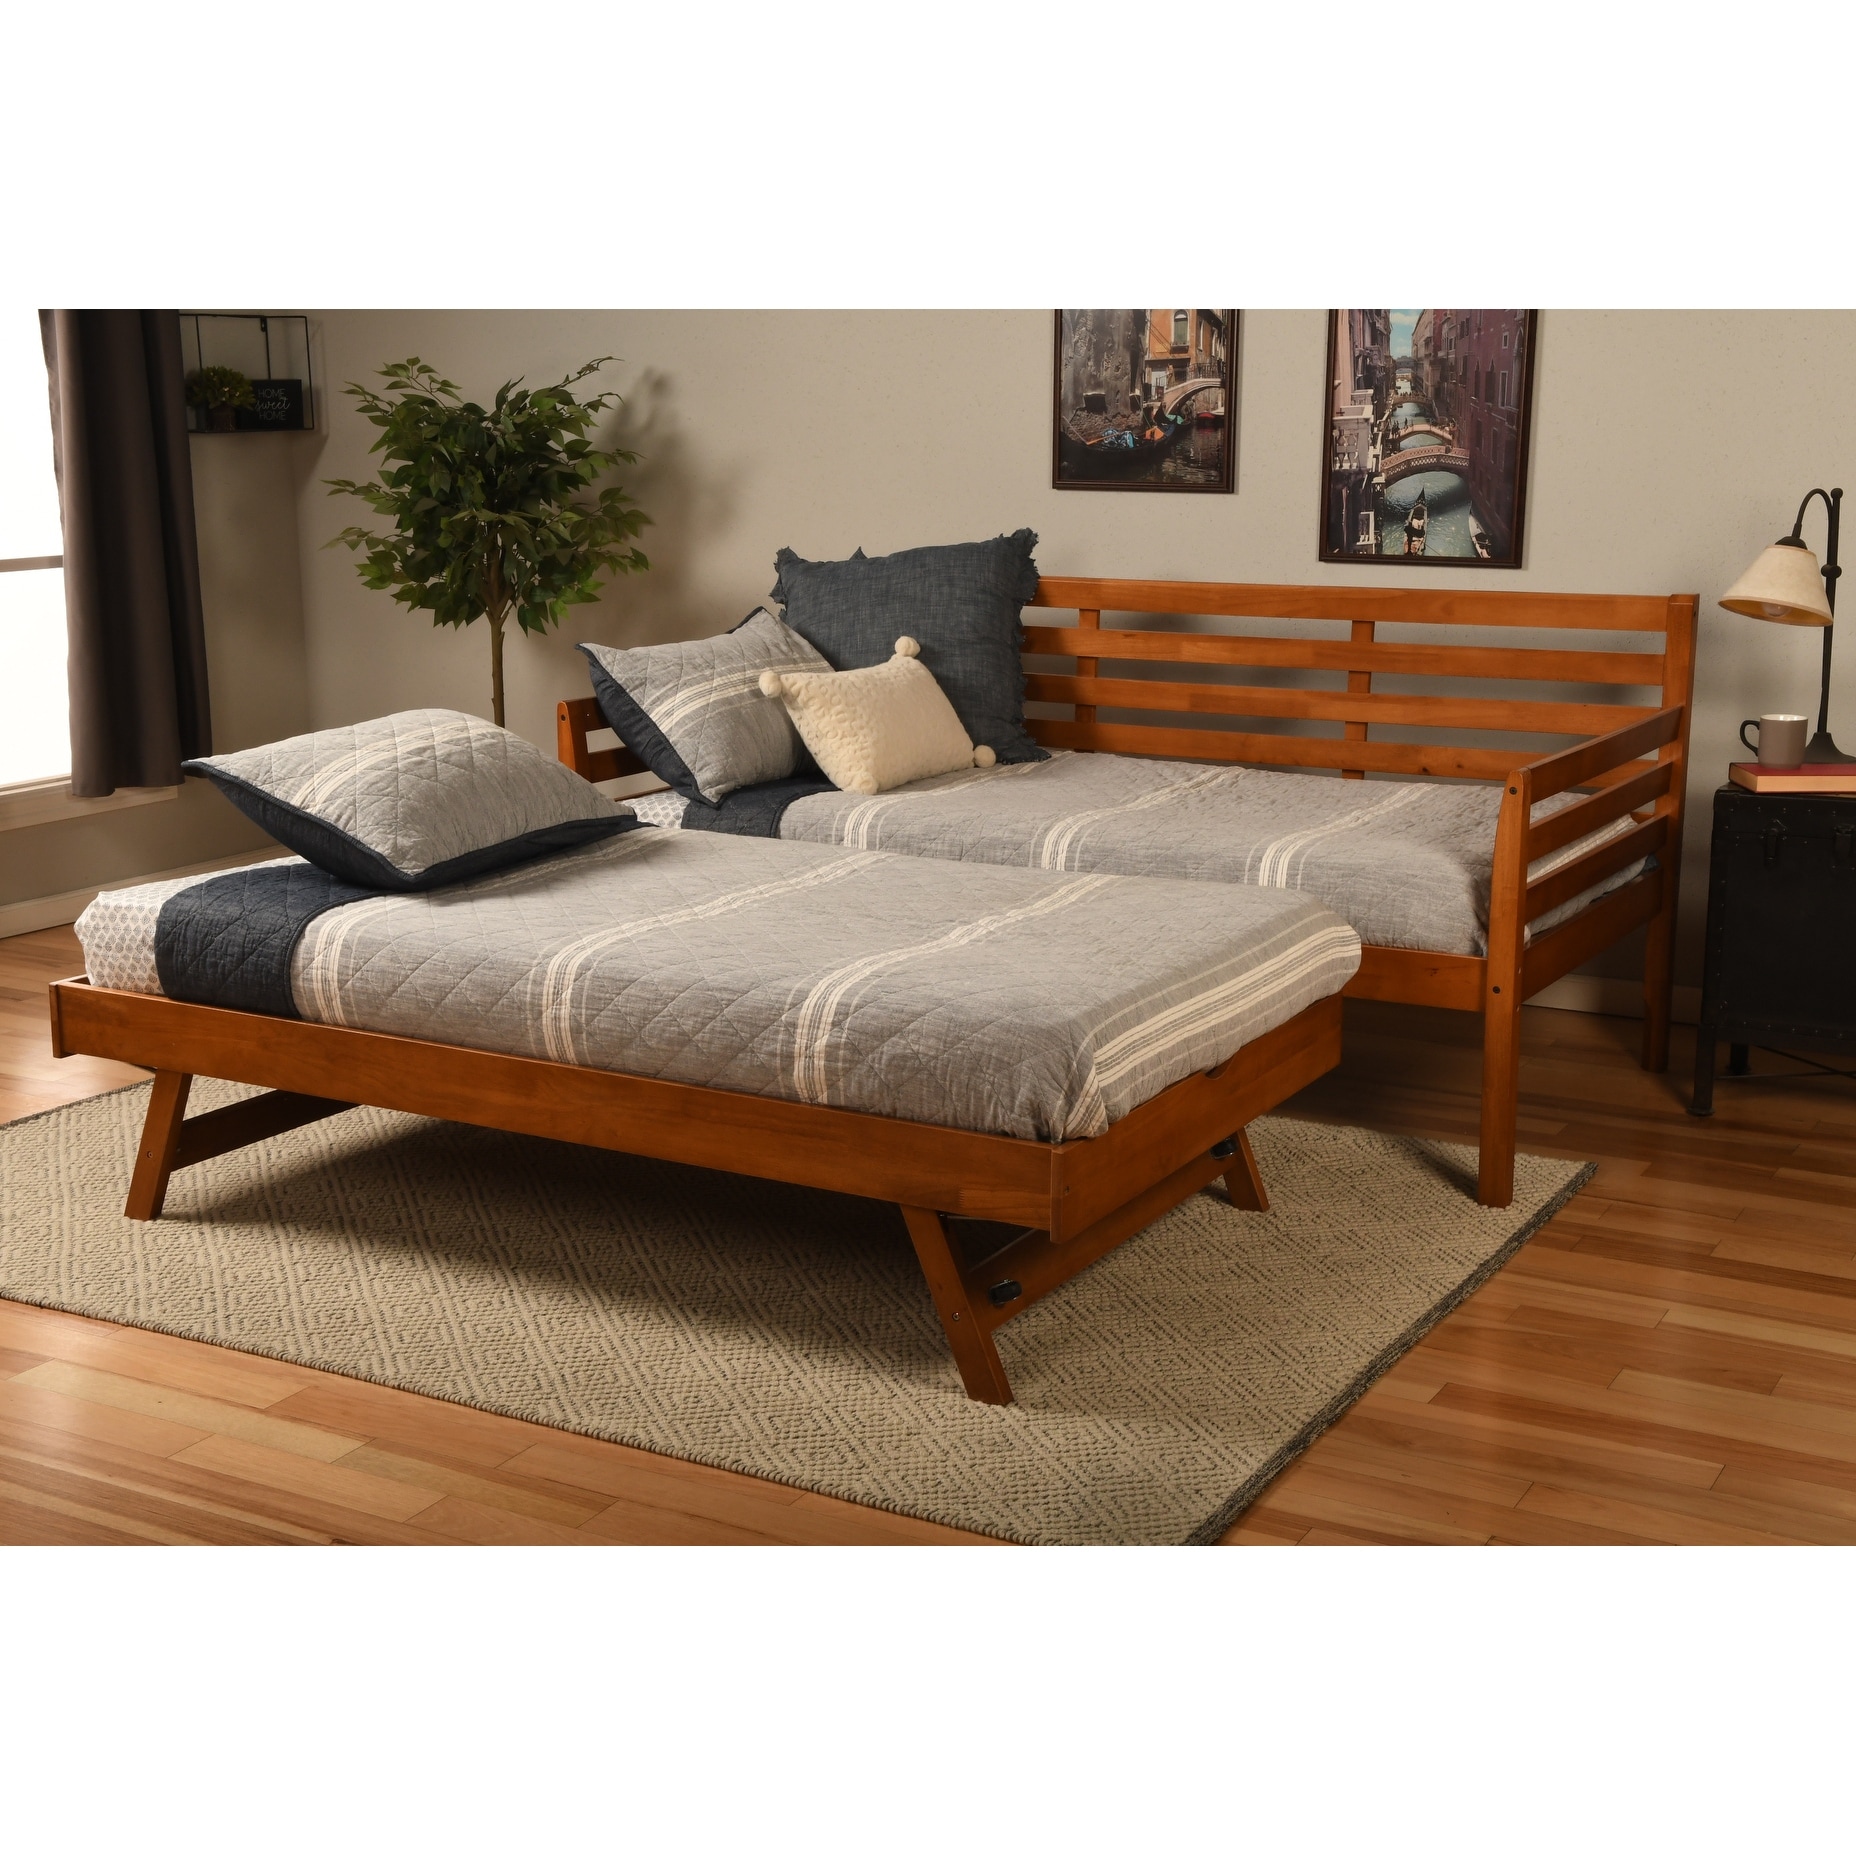 https://ak1.ostkcdn.com/images/products/is/images/direct/70bfb2e126d01233ecfd15d7f3ffe7151ccba6fe/Boho-Daybed-with-Additional-Pop-Up-Bed.jpg